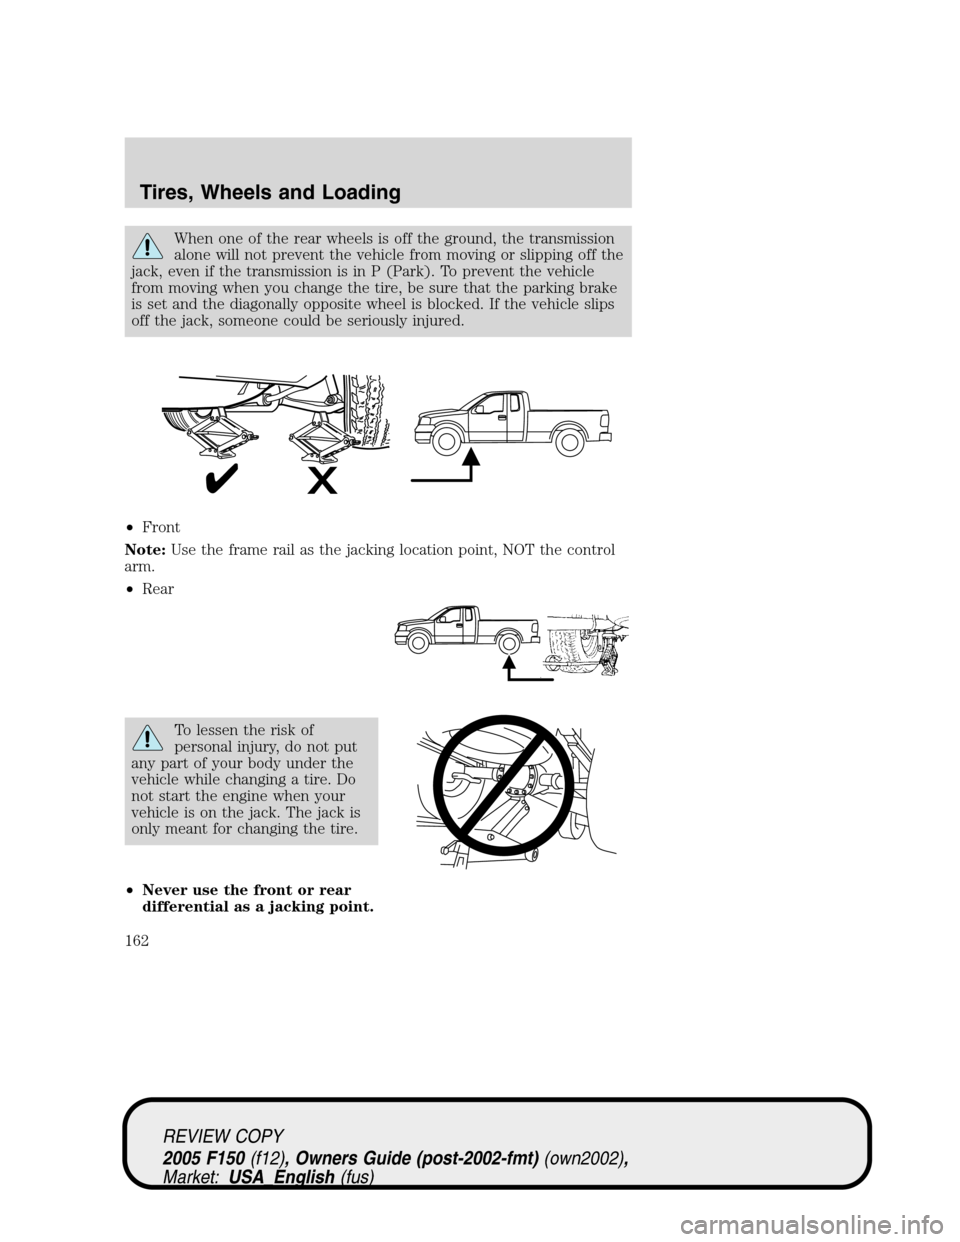 FORD F150 2005 11.G Owners Manual When one of the rear wheels is off the ground, the transmission
alone will not prevent the vehicle from moving or slipping off the
jack, even if the transmission is in P (Park). To prevent the vehicle